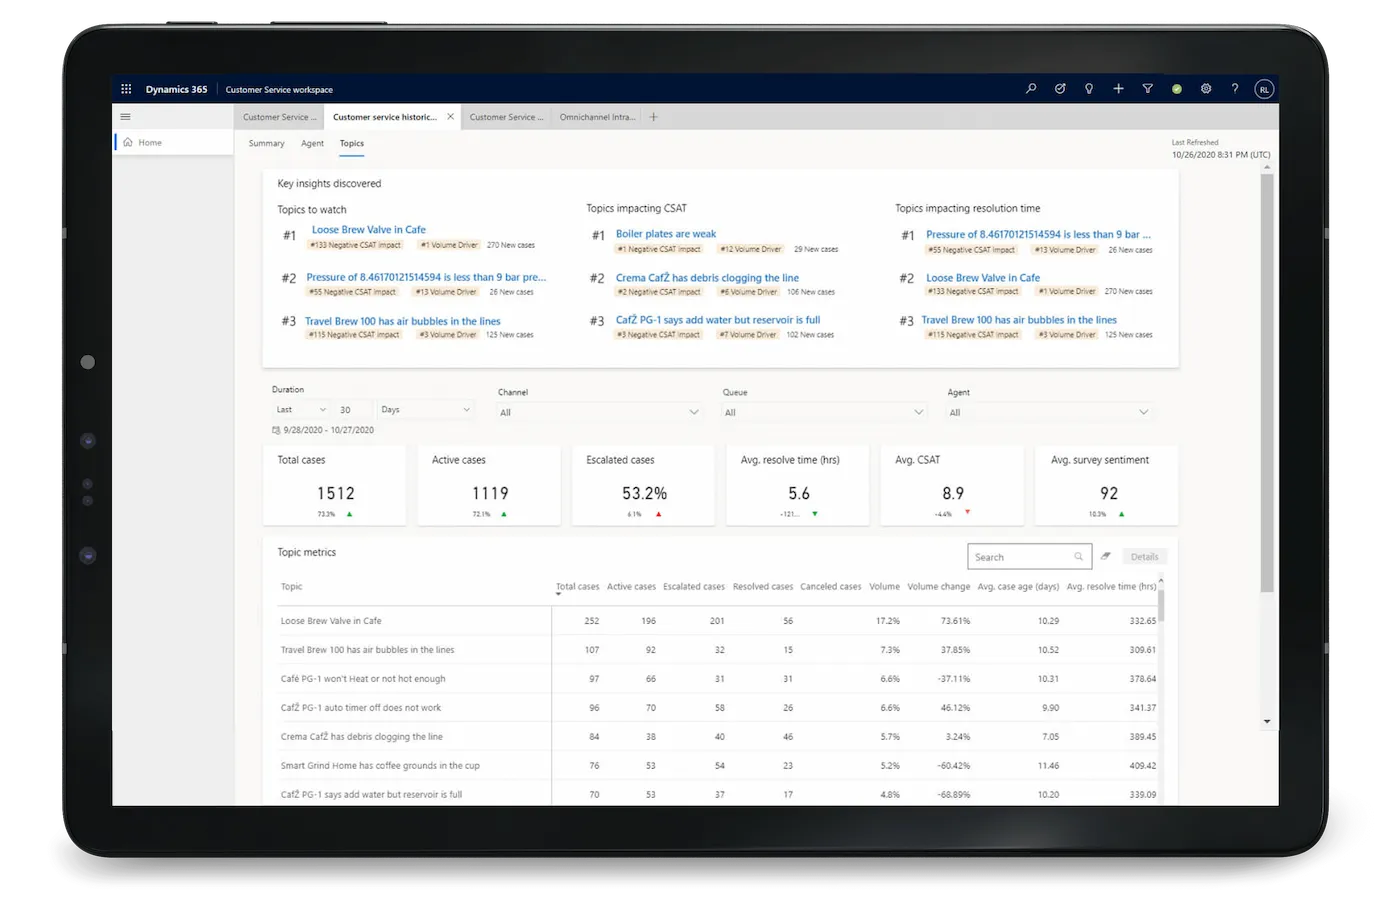 Track performance and get actionable insights with Dynamics 365 Customer Service